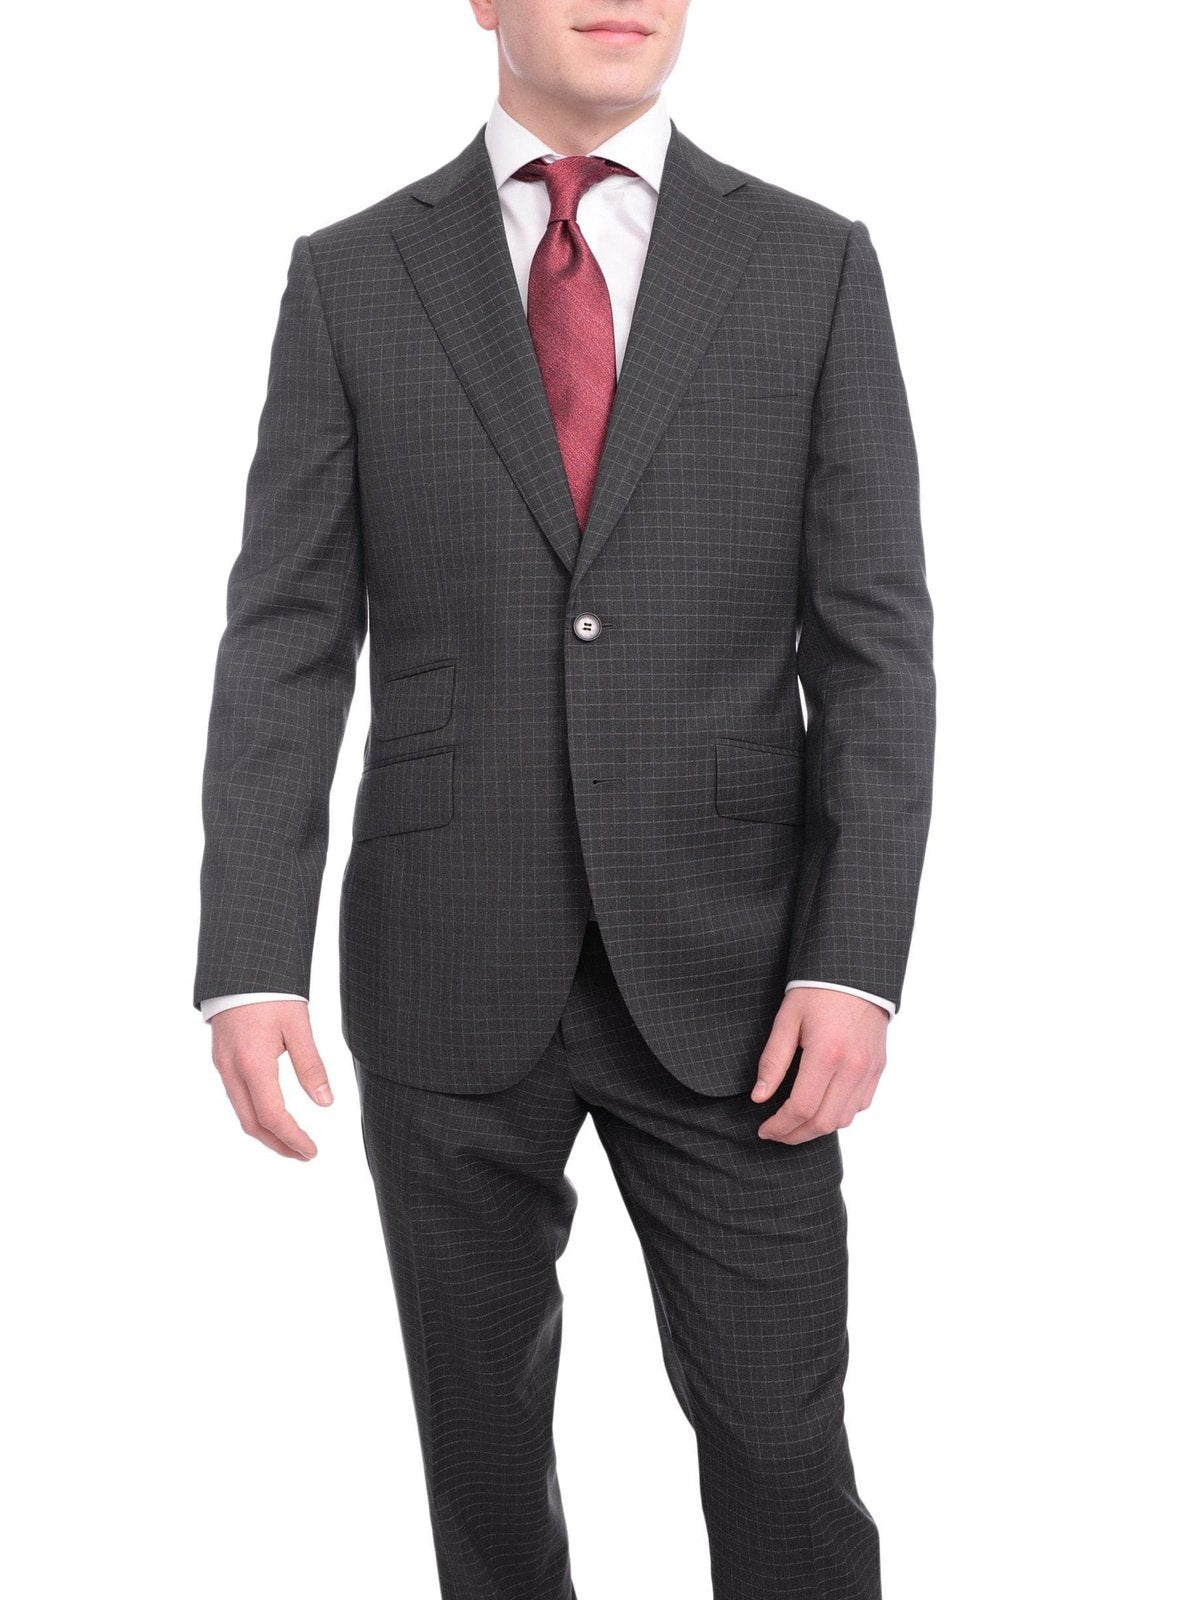 Napoli TWO PIECE SUITS Napoli Slim Fit Charcoal Gray Check Two Button Half Canvassed Tollegno Wool Suit